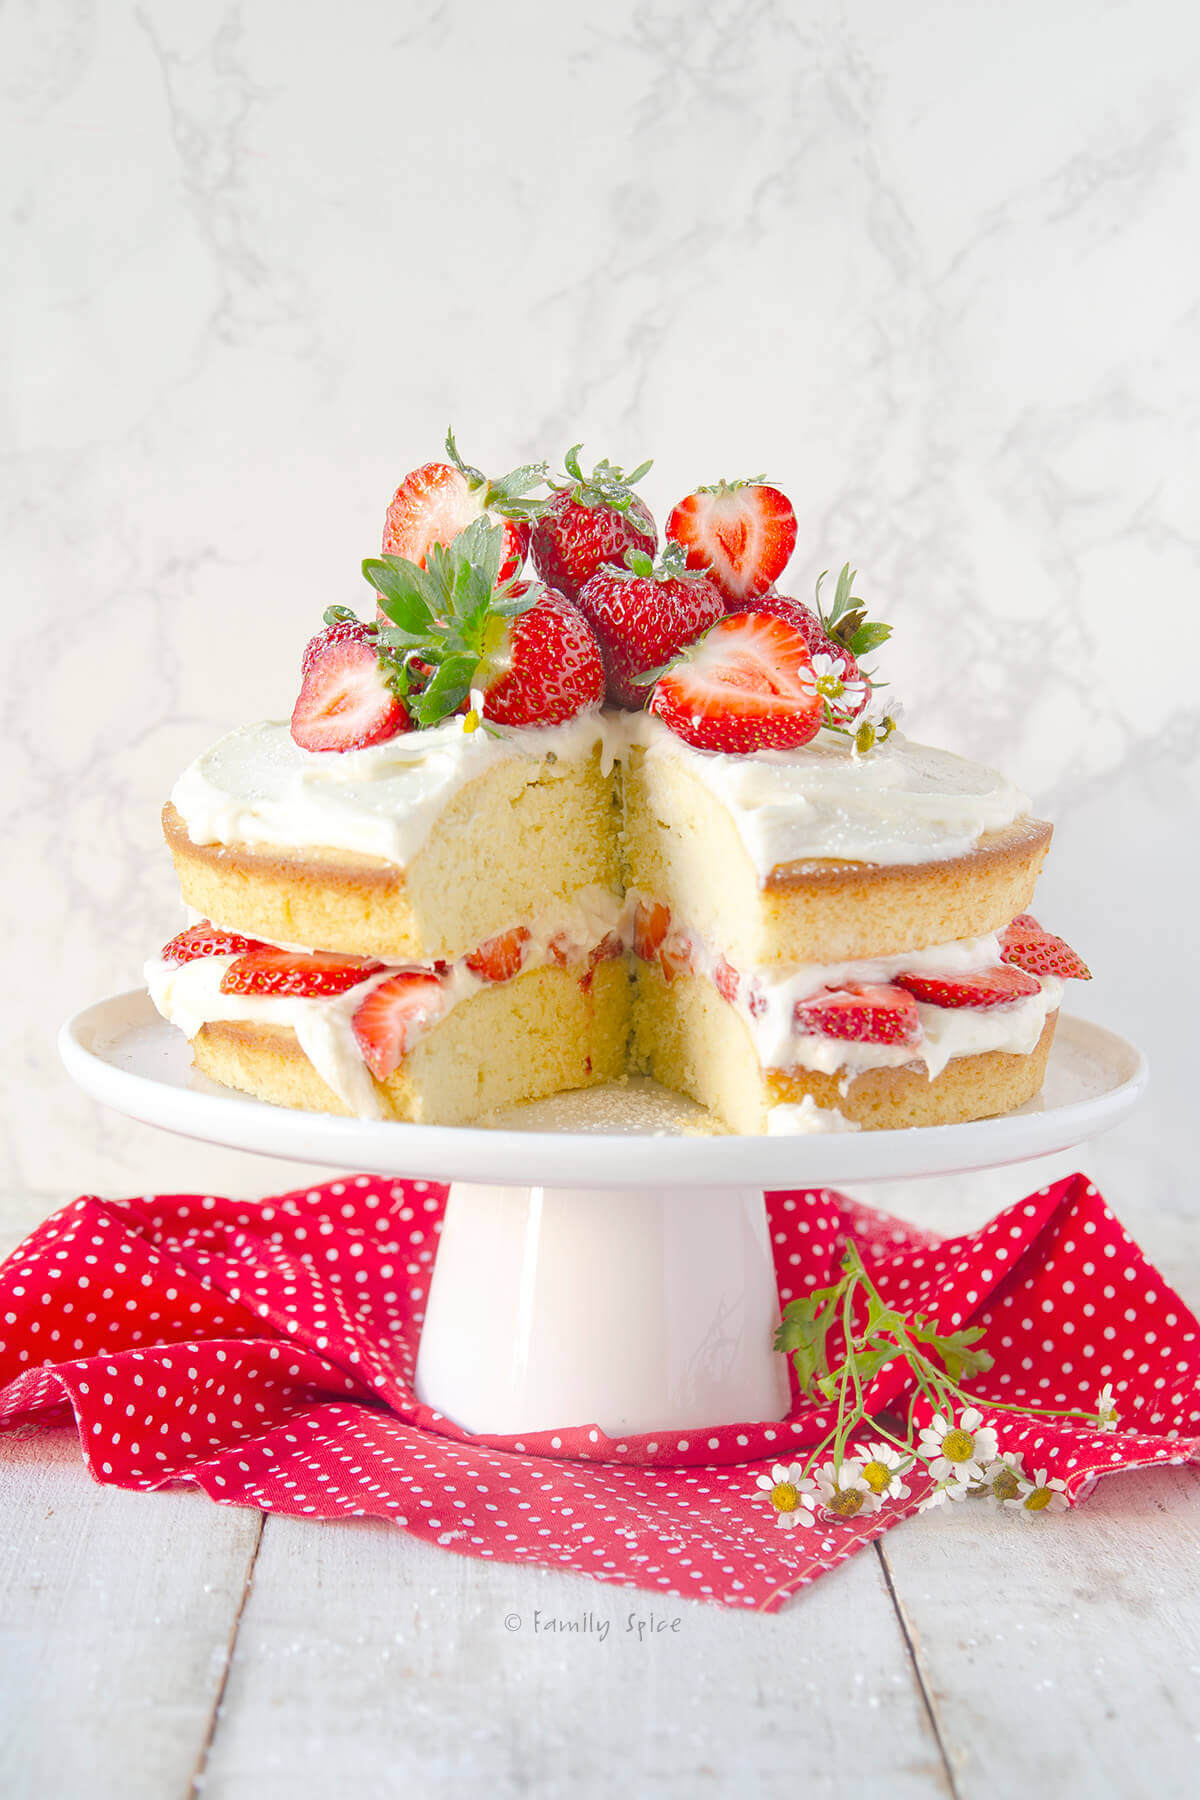 A vanilla cake frosted minimally with strawberry slices in between, with a slice cut out and topped with more fresh strawberries and chamomile flowers